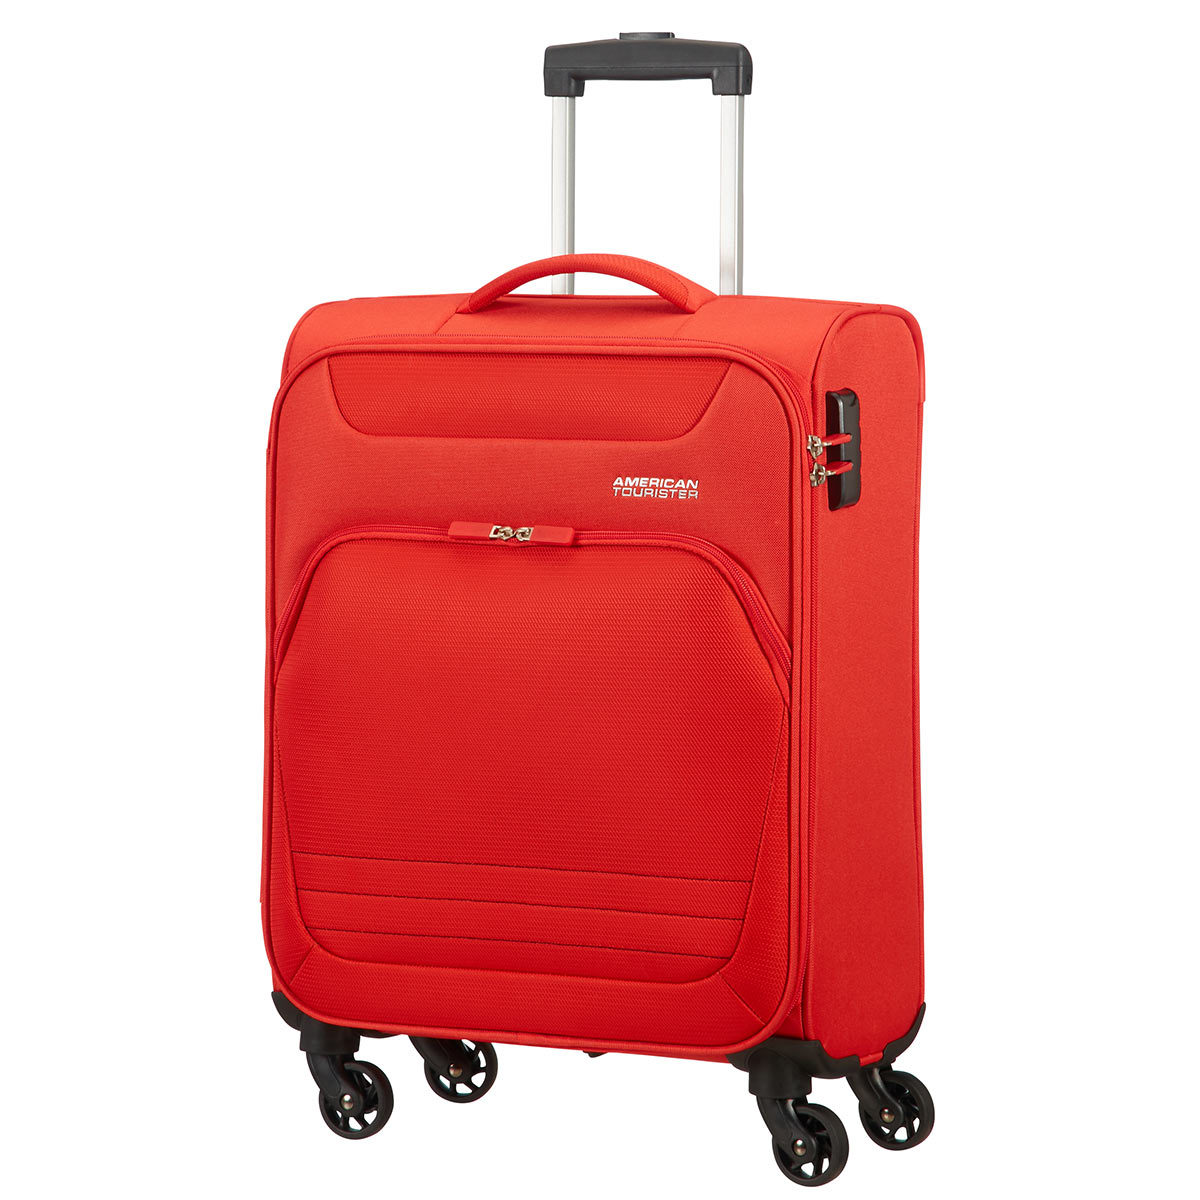 American Tourister Bombay Beach 3 Piece Softside Suitcase Set in Tropic ...